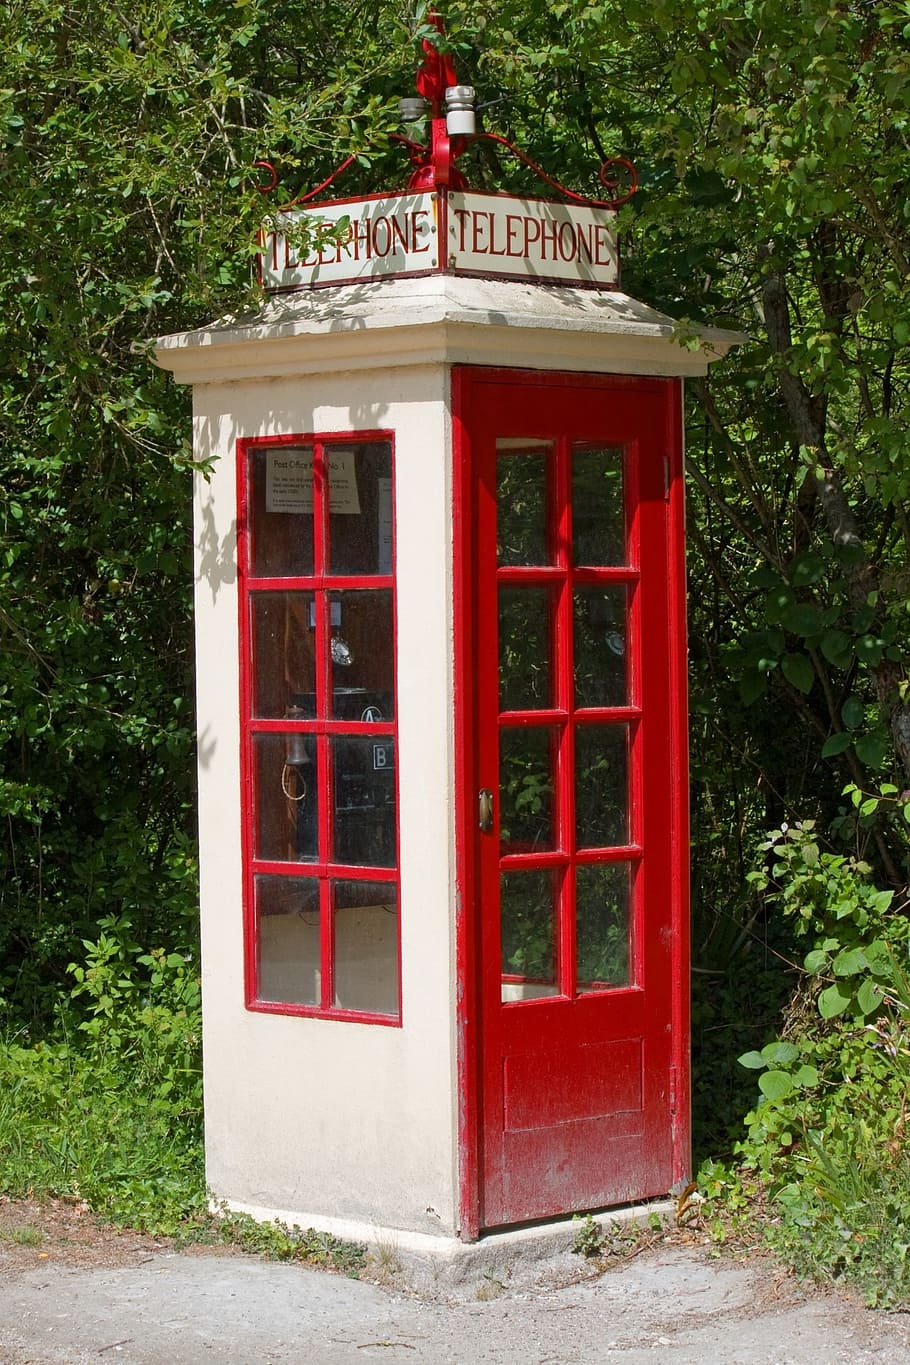 Telephone Box, Vintage, Old, English, British, Faded, - Telephone Booth - HD Wallpaper 